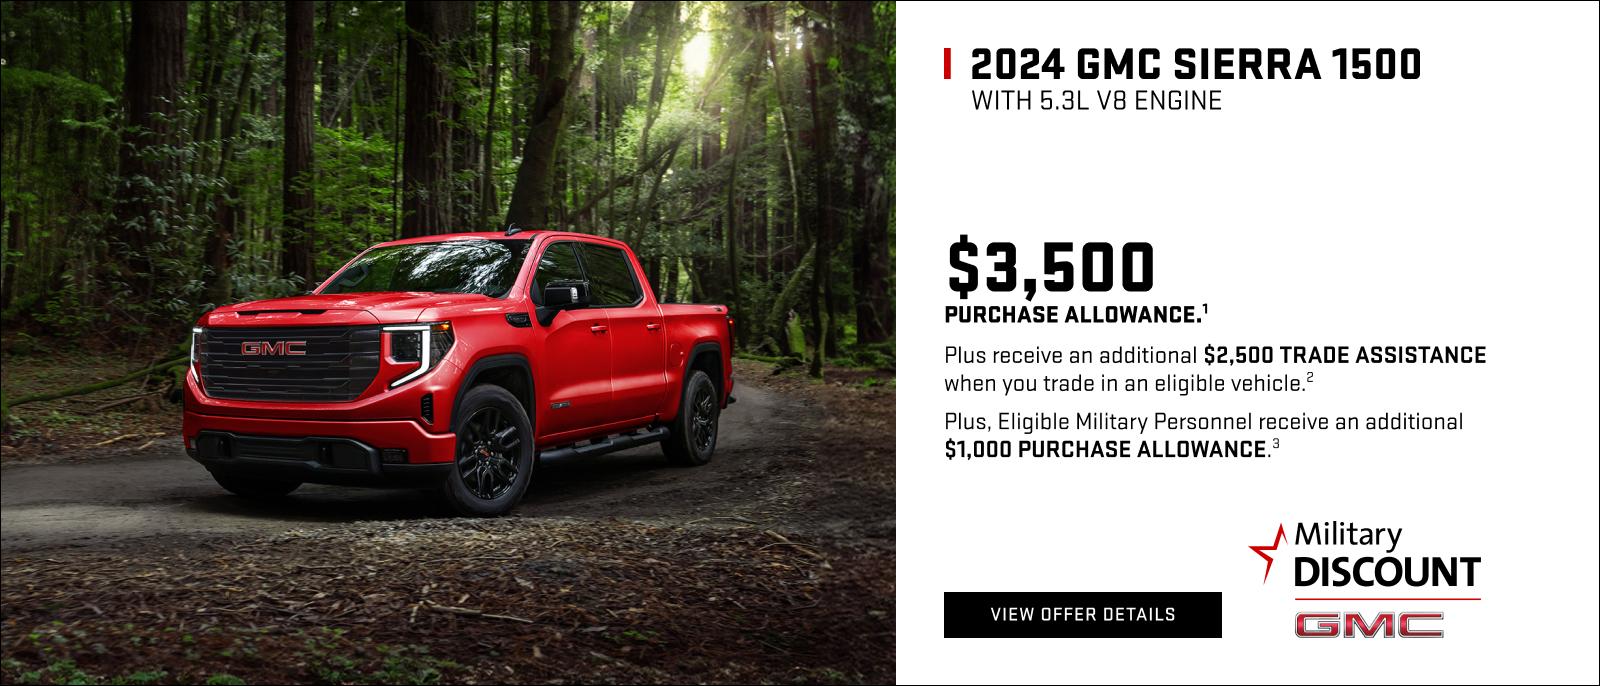 $3,500 PURCHASE ALLOWANCE.1

Plus, receive an additional $2,500 TRADE ASSISTANCE when you trade in an eligible vehicle.2

Plus, Eligible Military Personnel receive an additional $1,000 PURCHASE ALLOWANCE.3